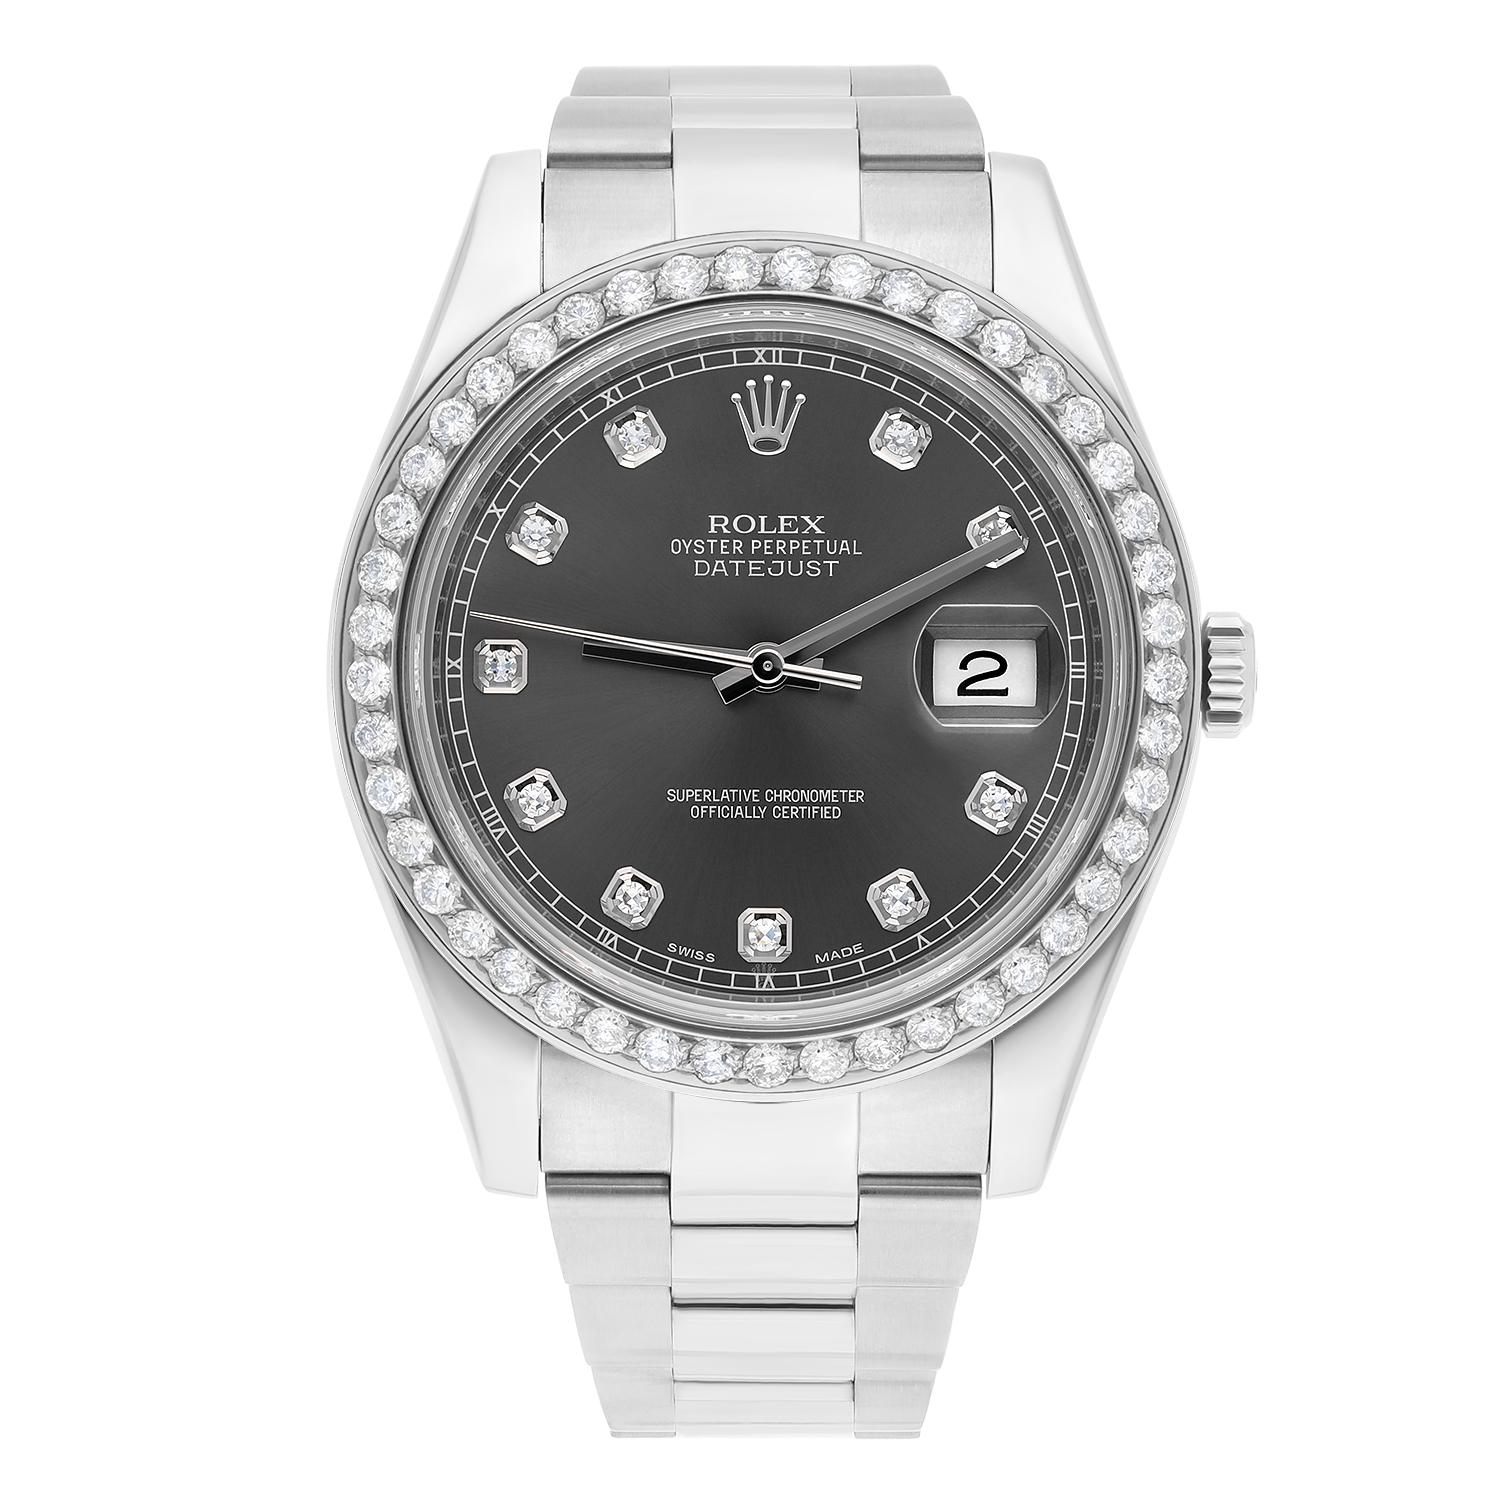 This watch has been professionally polished, serviced and does not have any visible scratches or blemishes.
It can easily pass as unworn. Diamonds are 100% natural.
Sale comes with a Rolex box, appraisal certificate validating authenticity of the